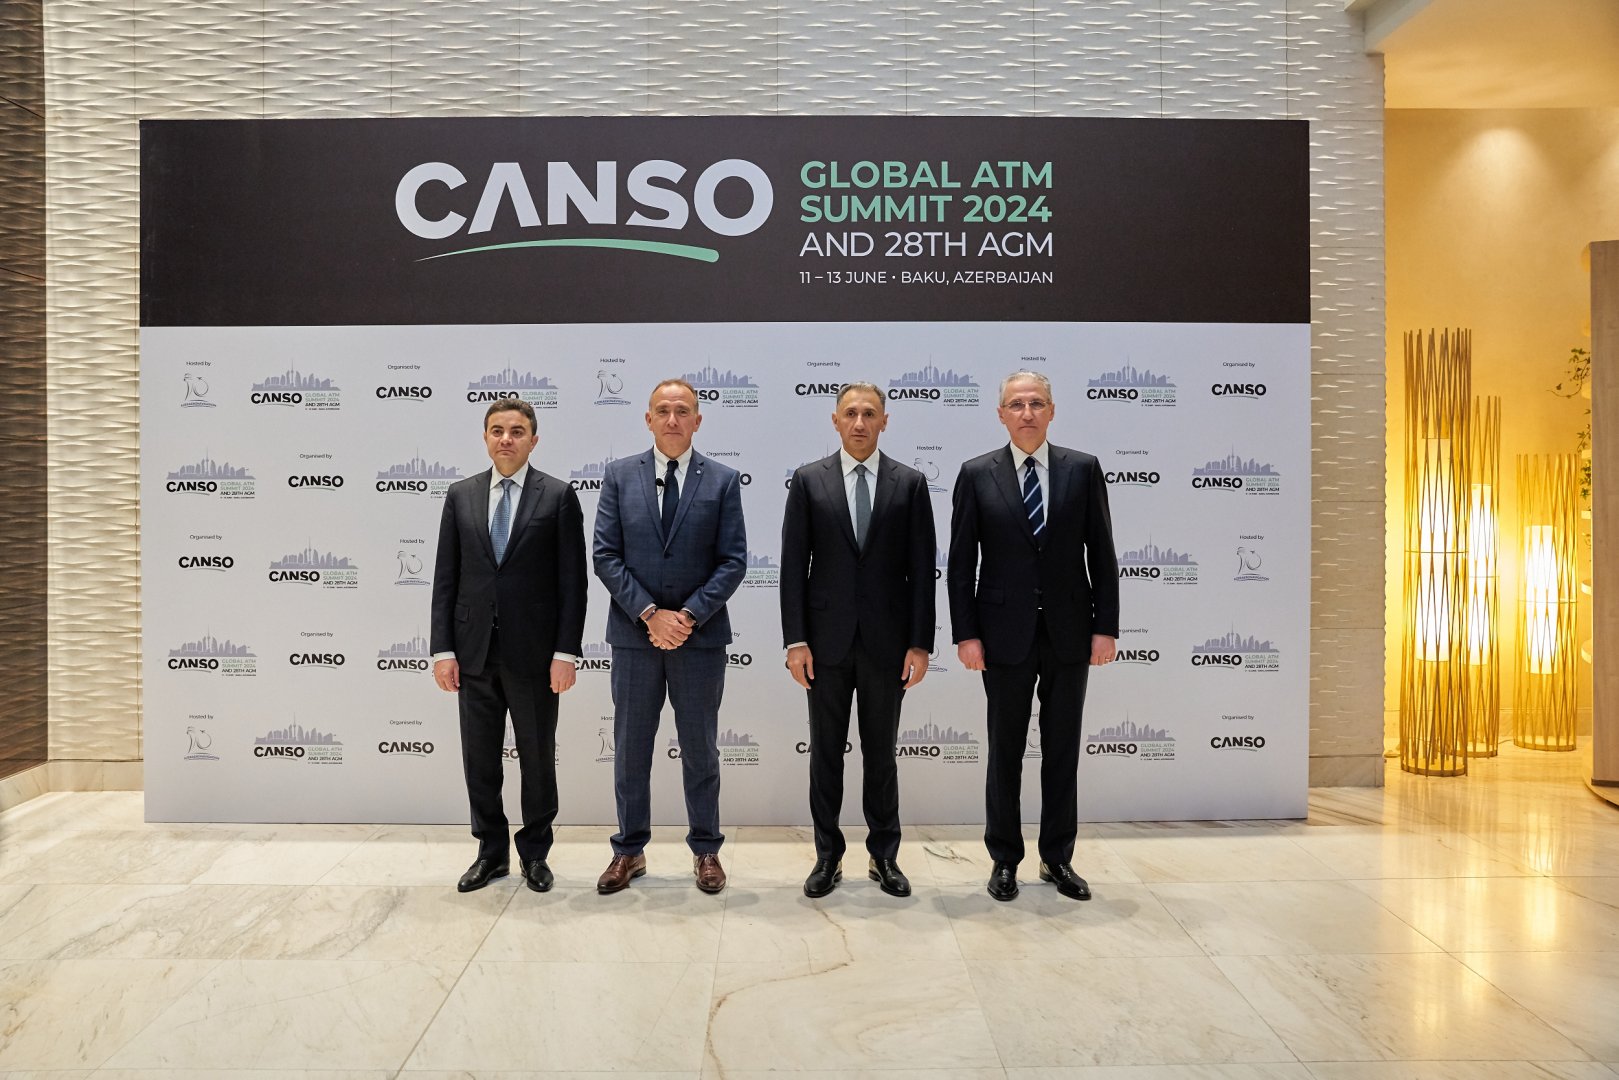 Environmental Sustainability in the spotlight at the CANSO Global ATM Summit 2024 in Baku (PHOTO)